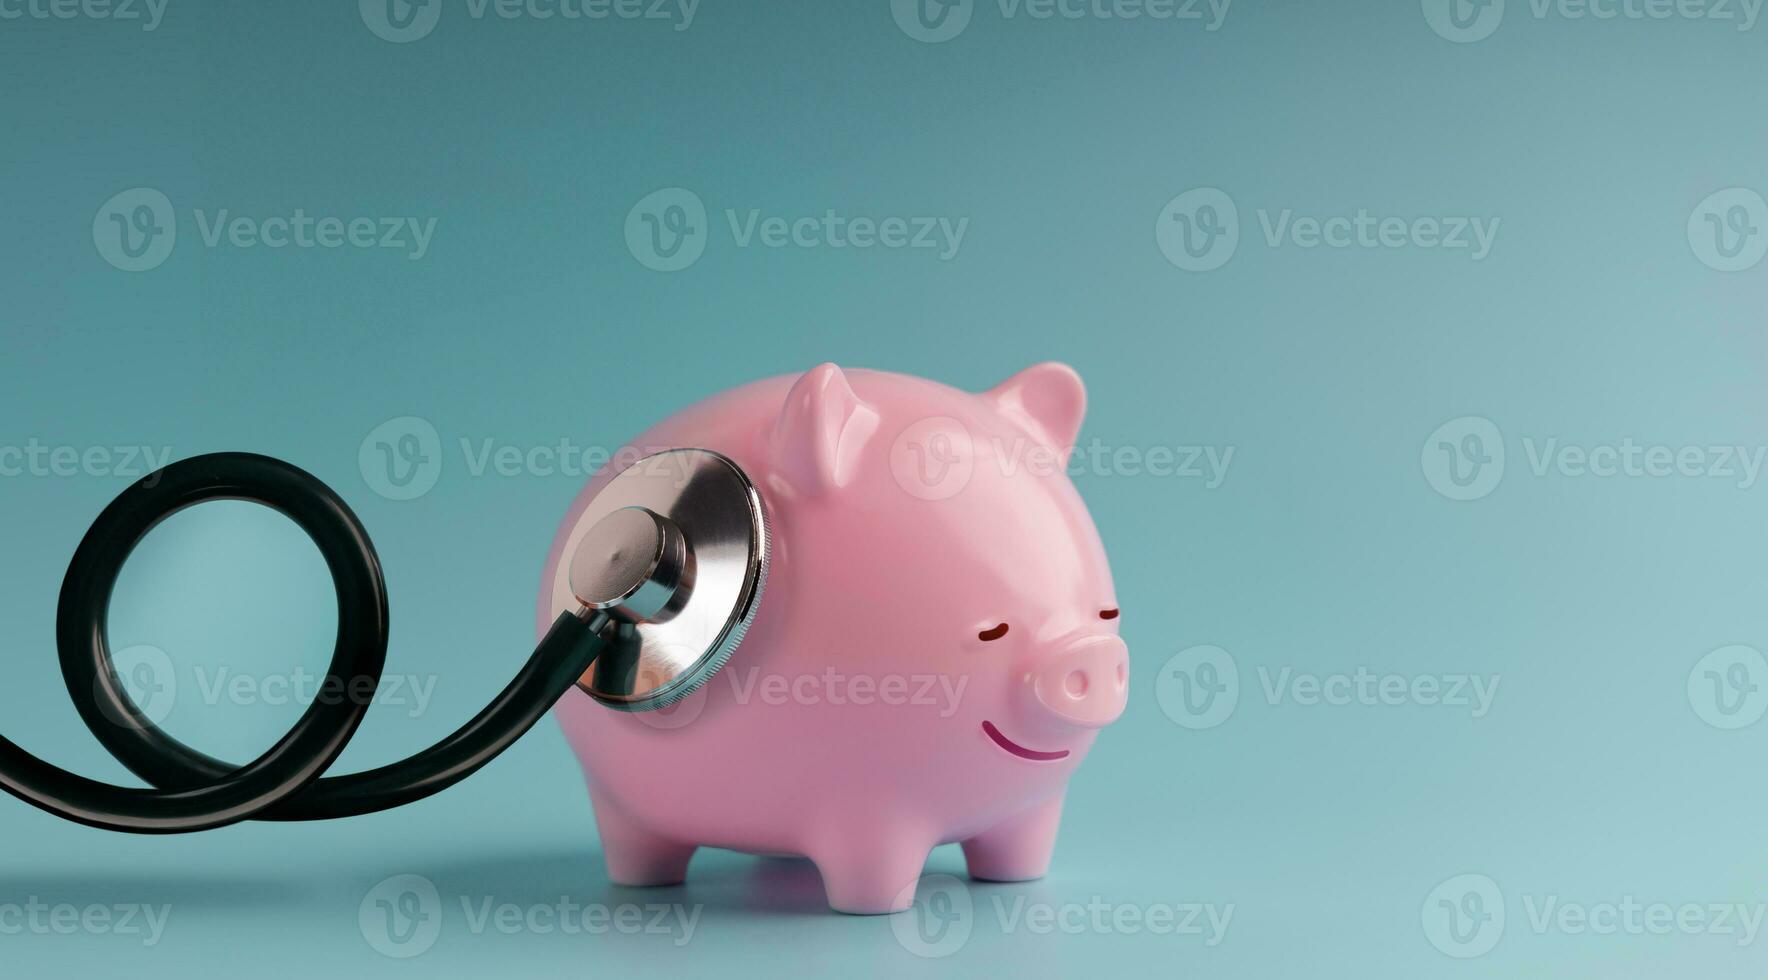 Finanacial Checkup, Review Concept. Meeting with a Financial Expert for Examination of Valuable Financial Assets, Money, Cost, Debts, Retirement Contributions. Chubby Piggy Bank with Stethoscope photo